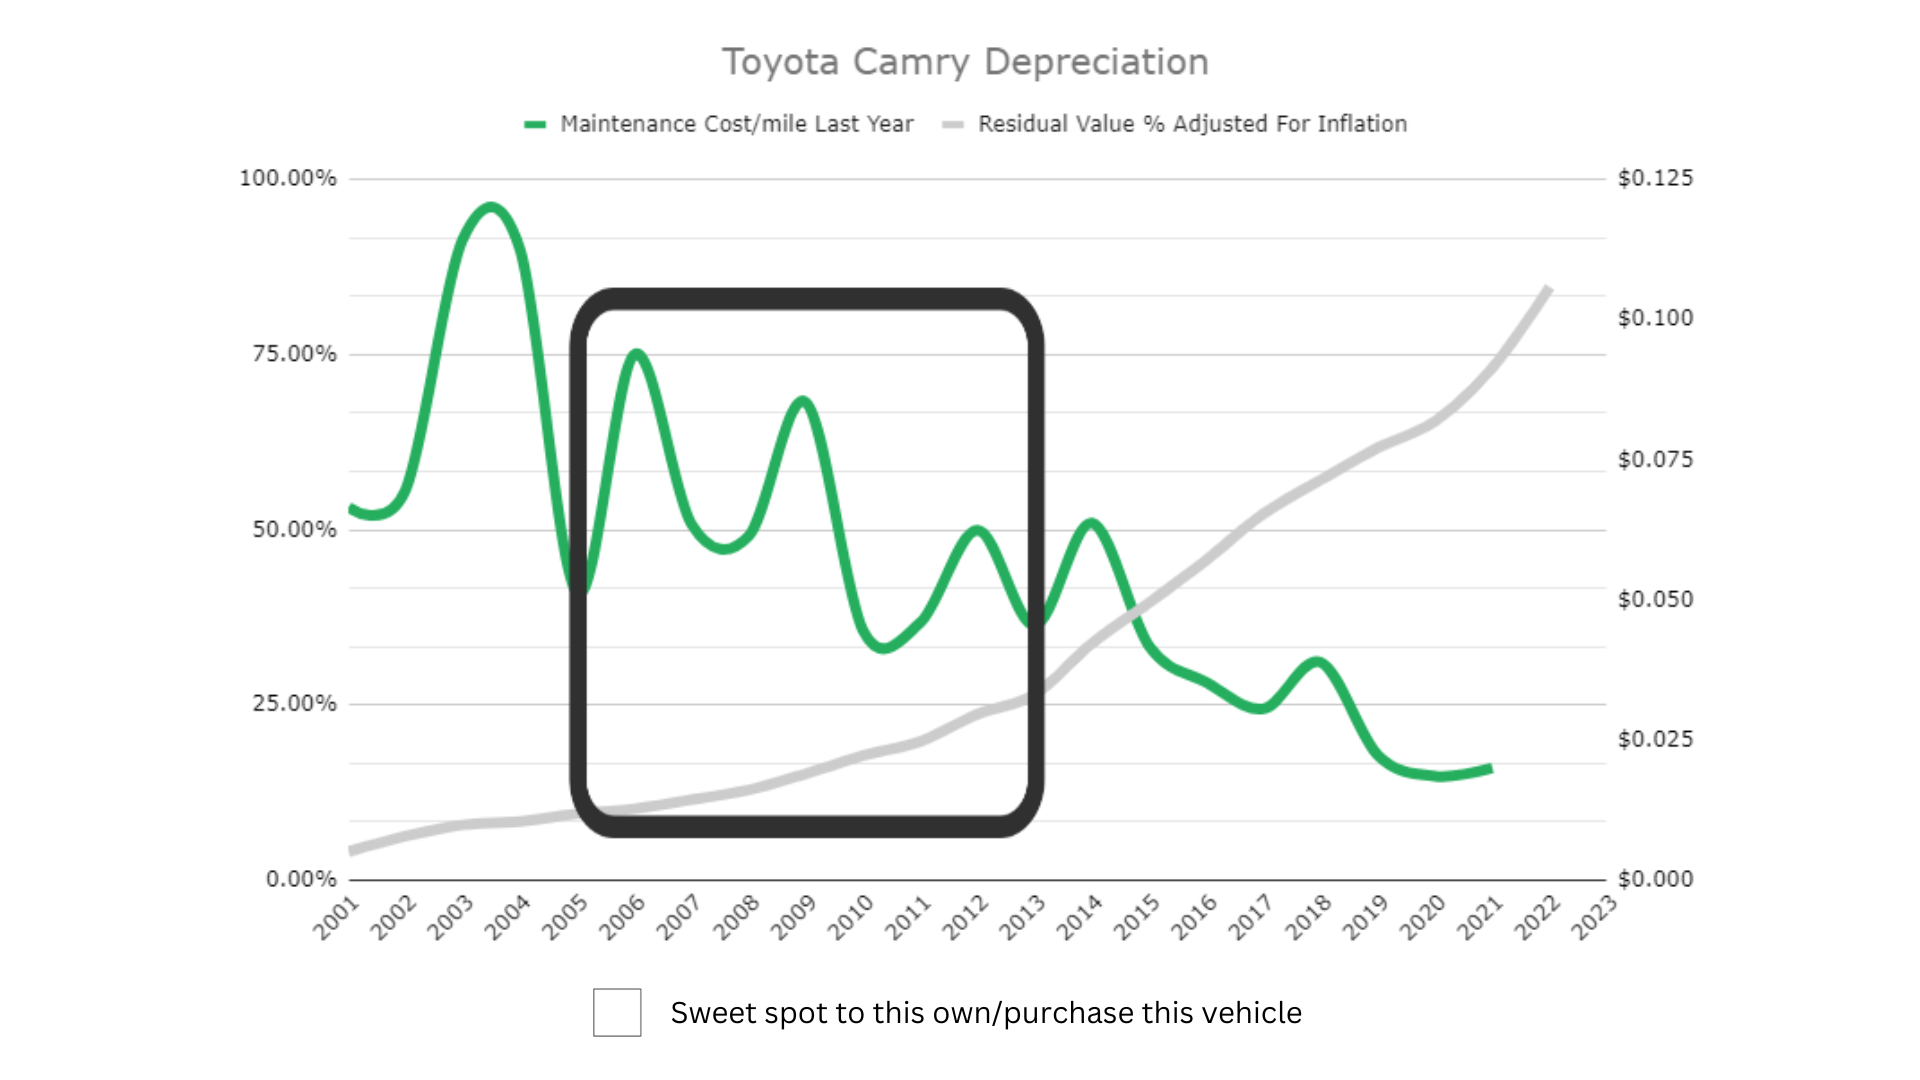 A chart showing the depreciation of the Toyota Camry. It shows the best time to own/purchase a Toyota Camry